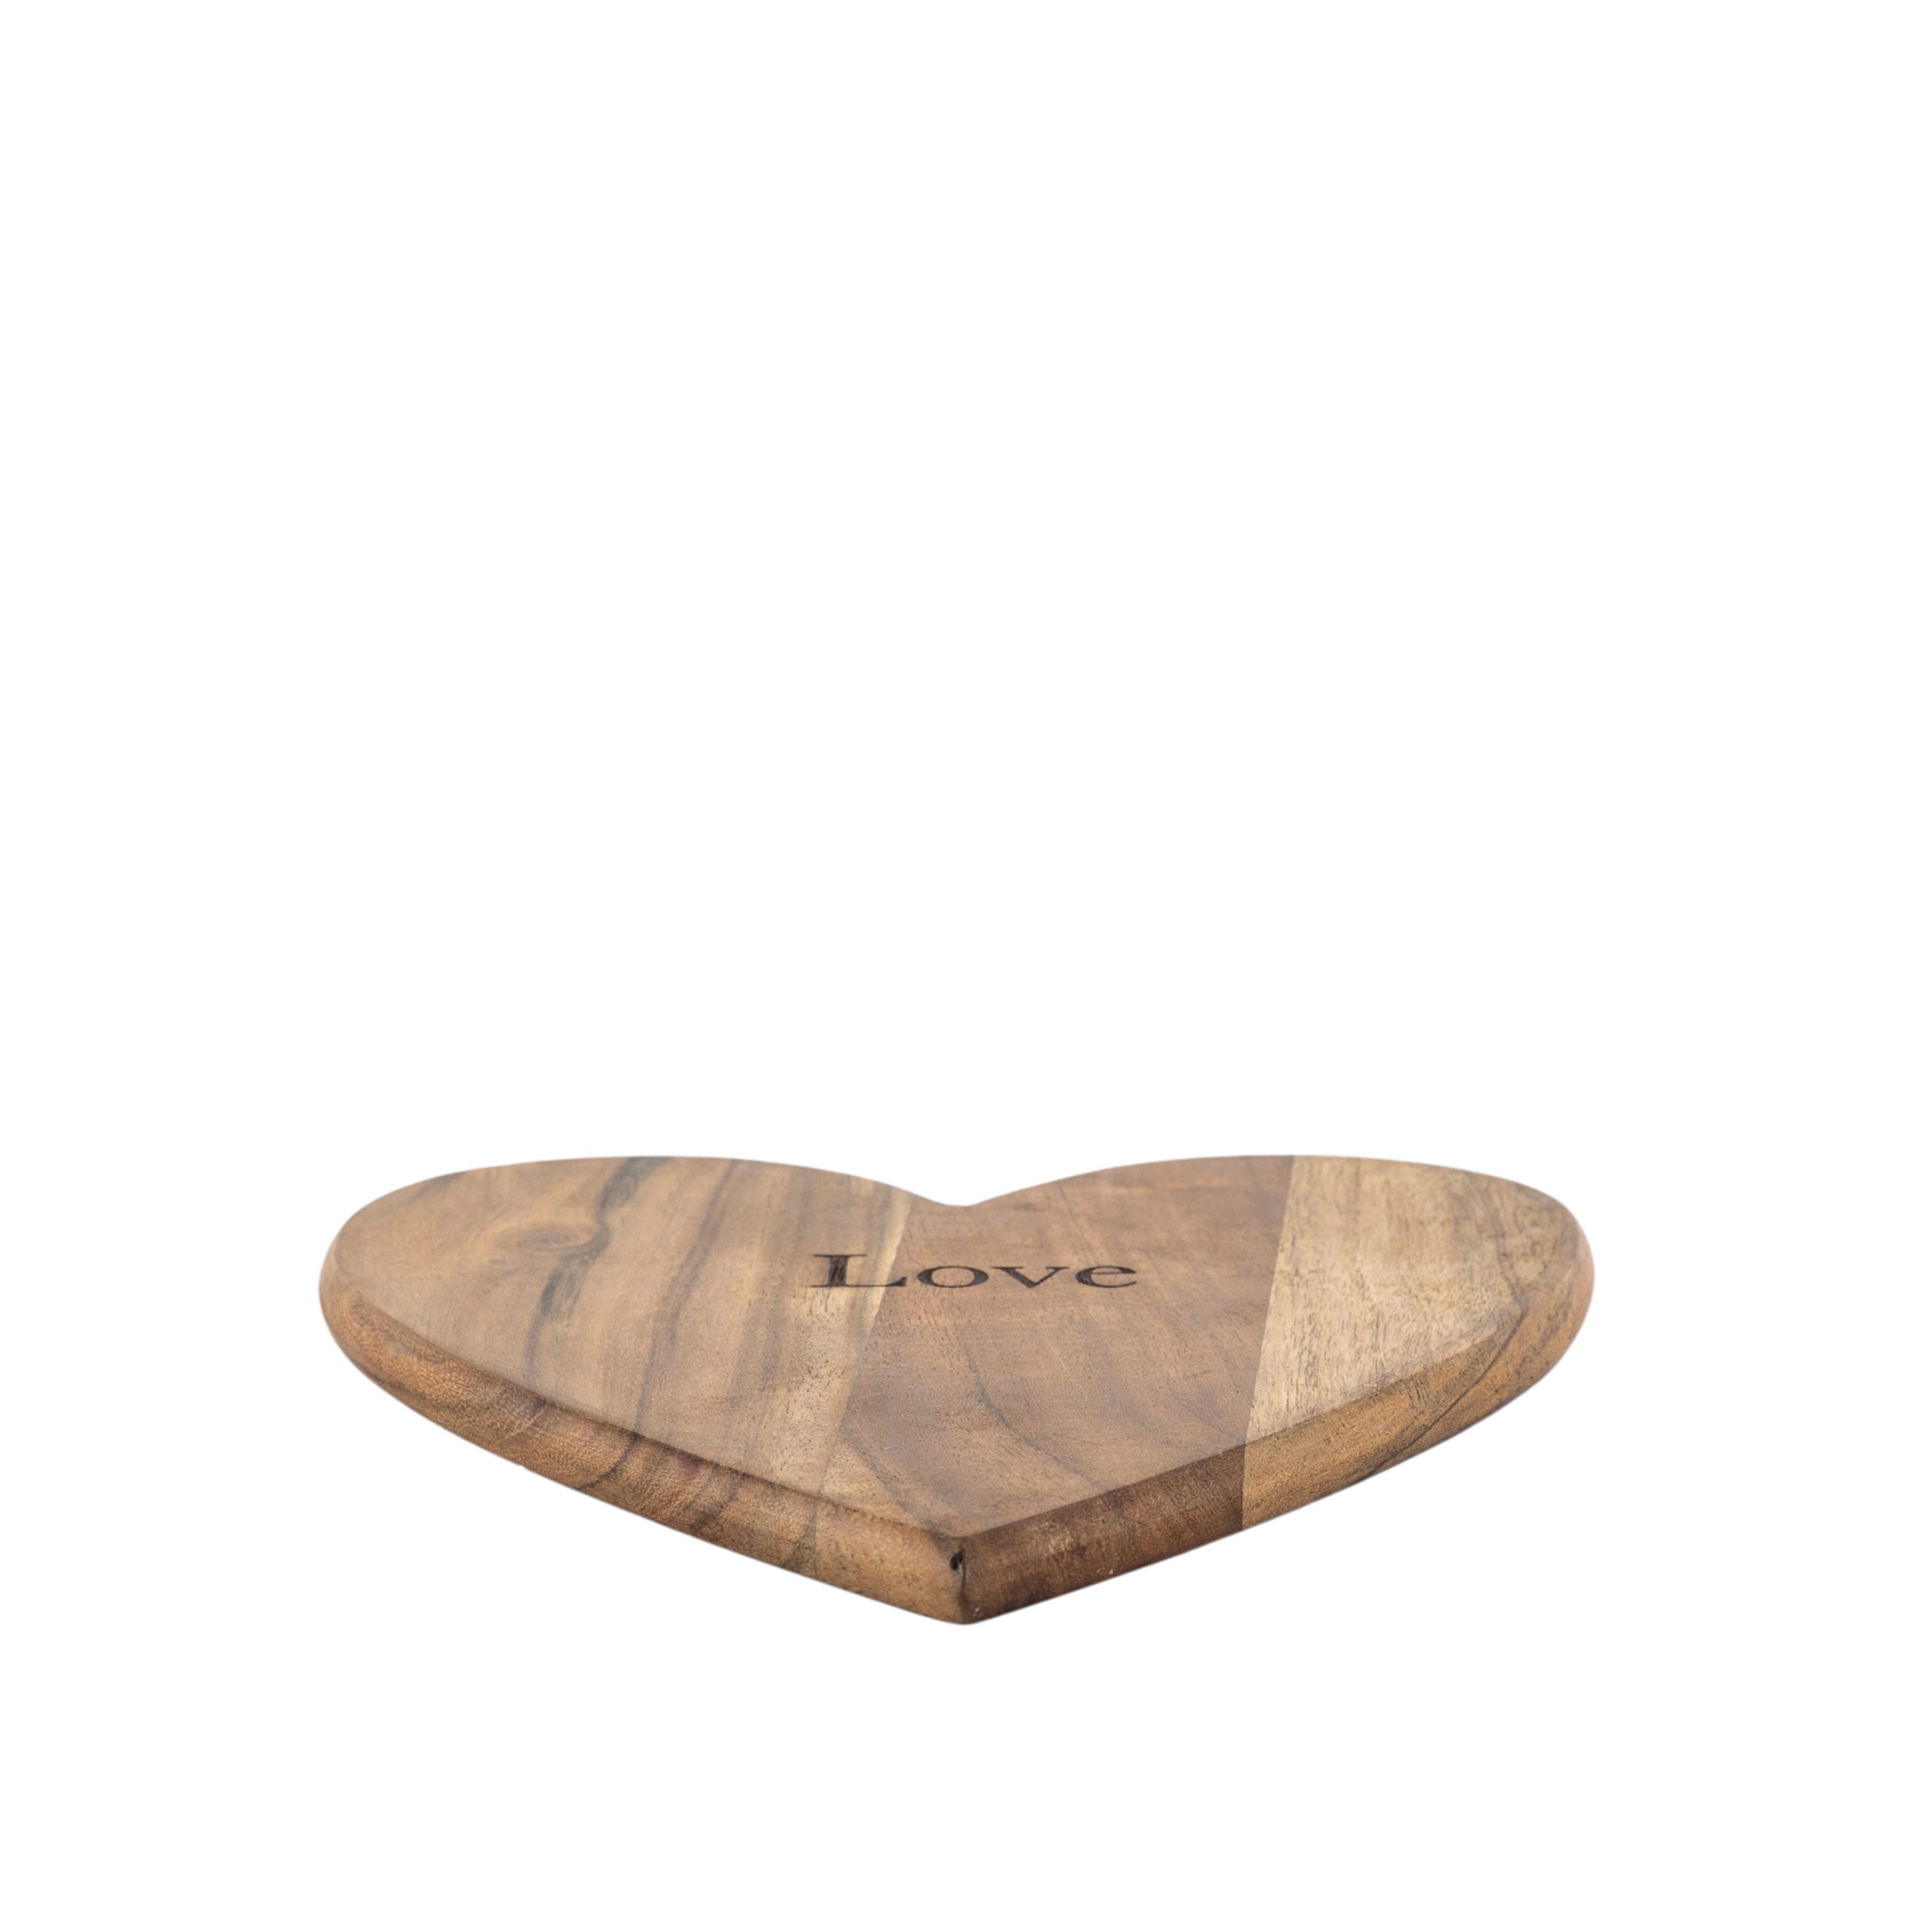 Gallery Direct Emotive Heart Chopping Board Natural